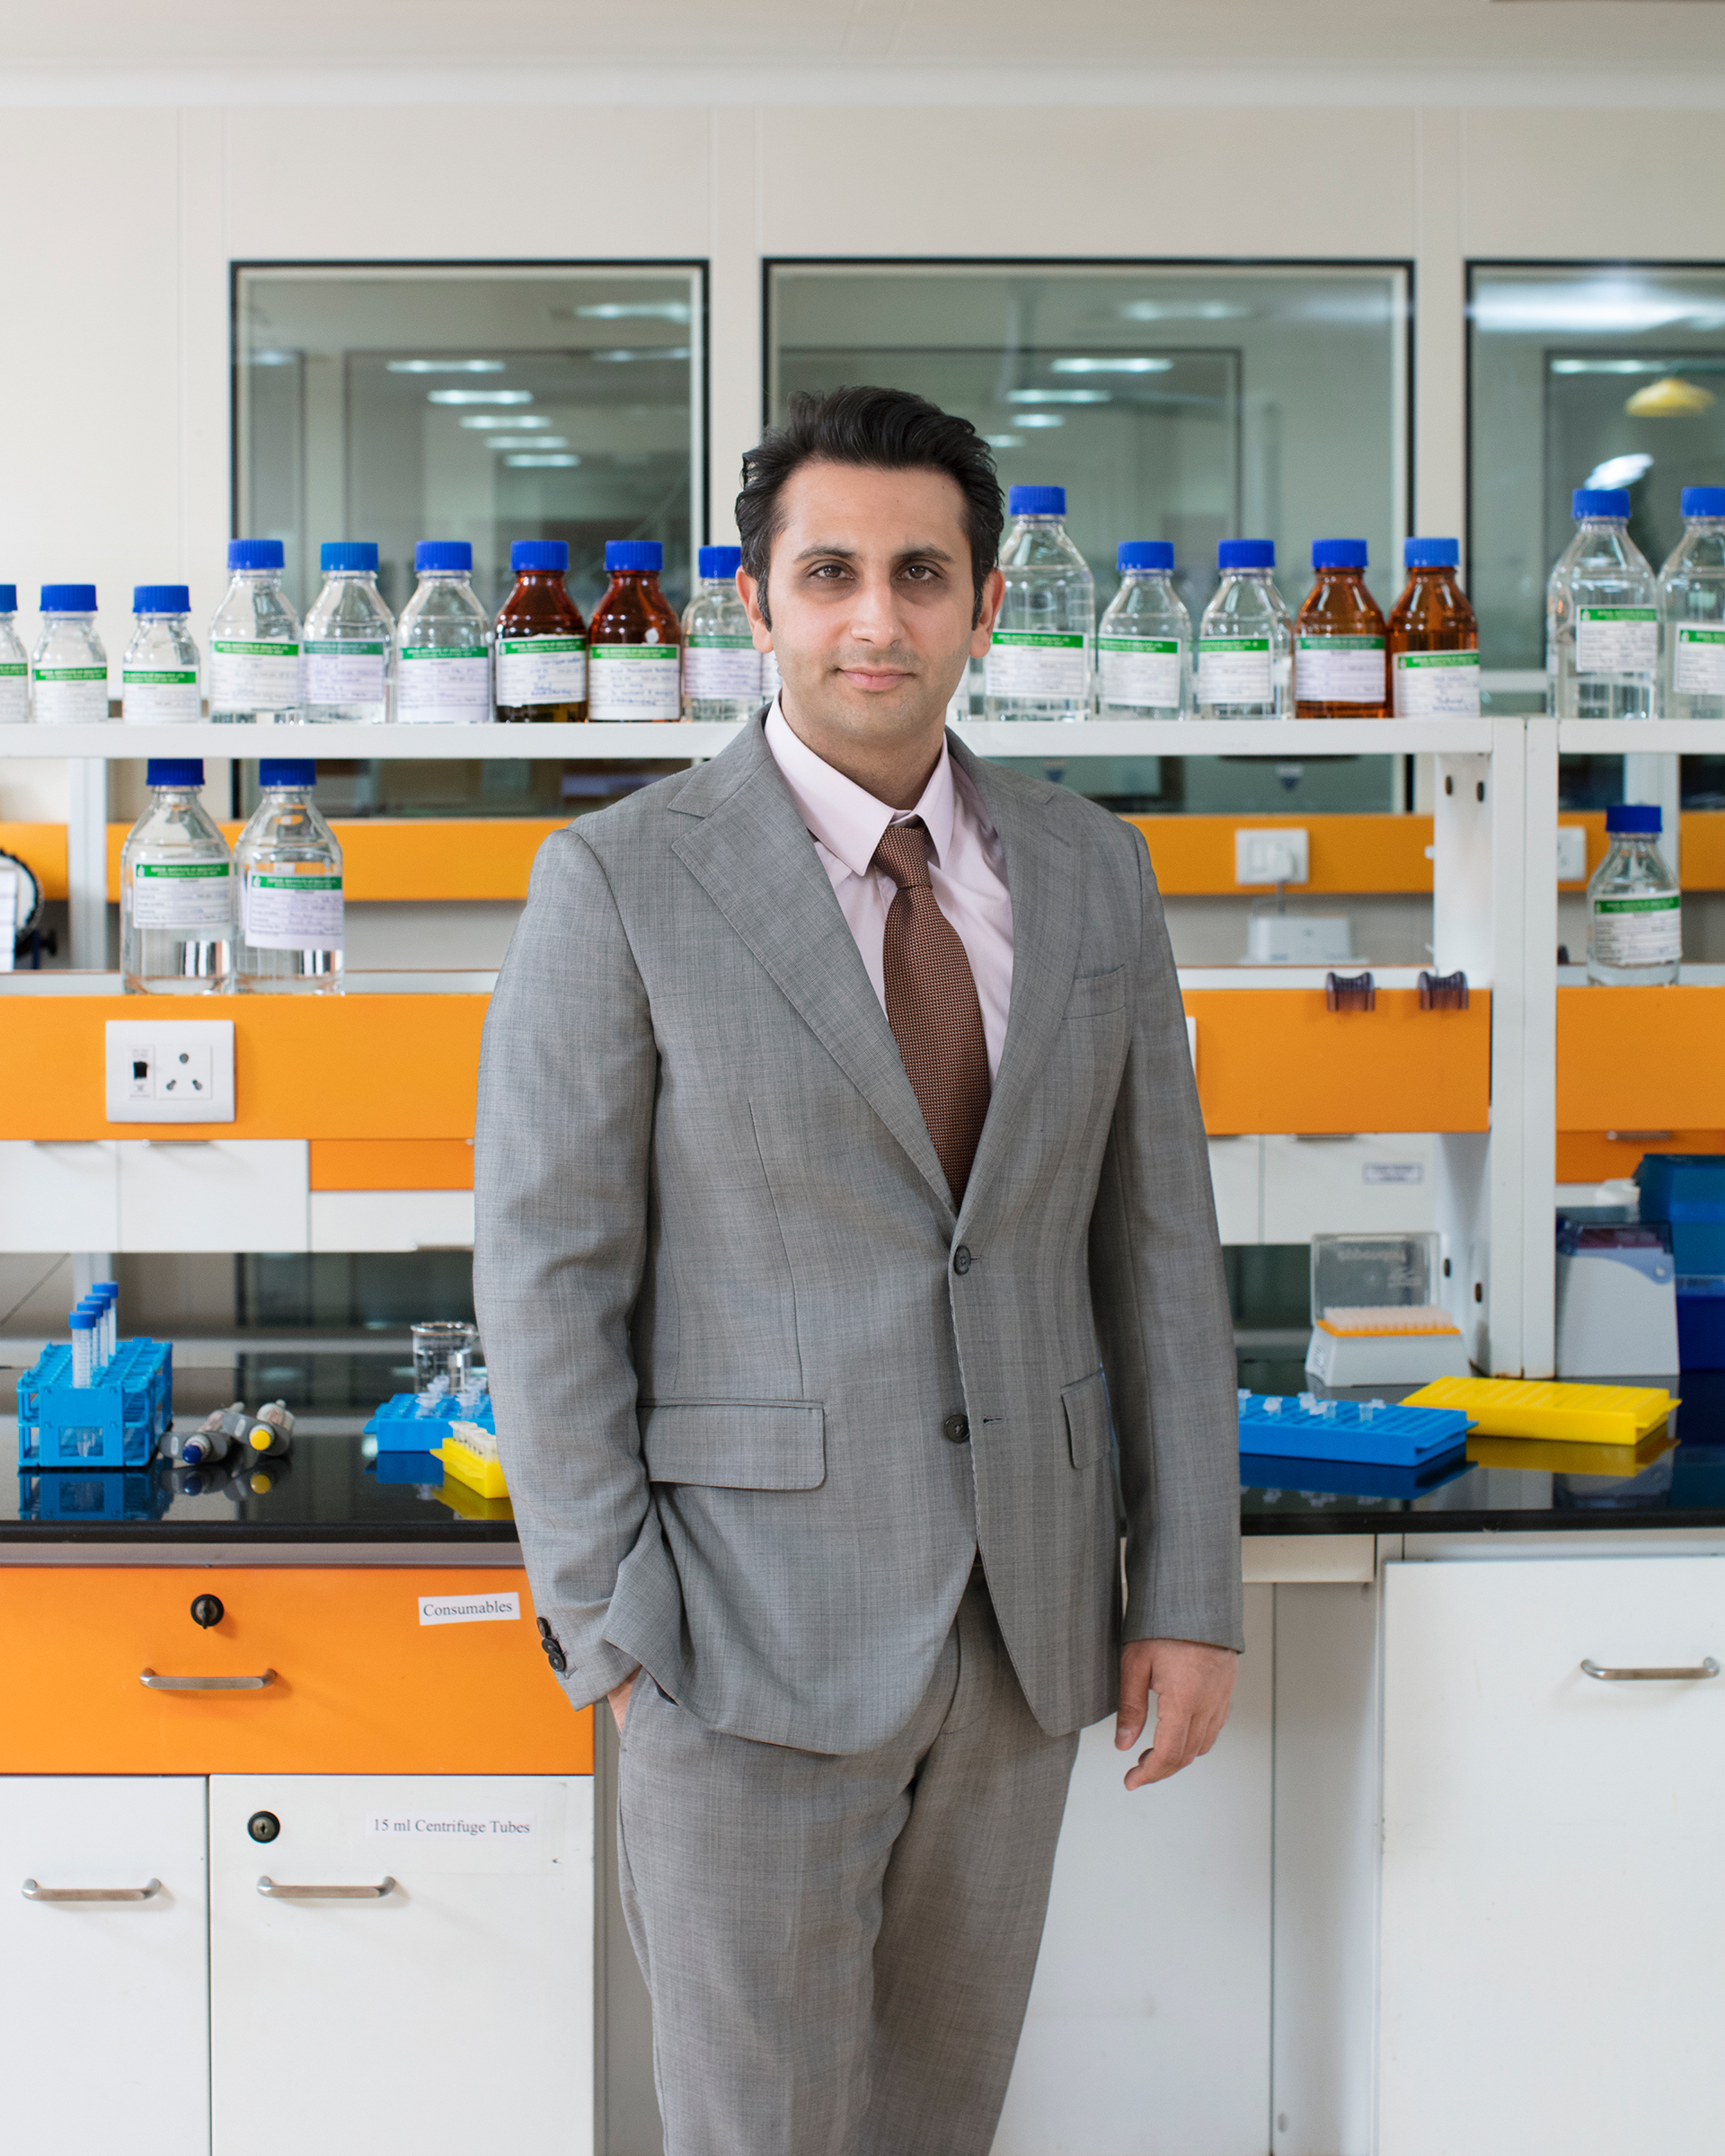 Poonawalla at the Serum Institute of India’s headquarters in Pune in March 2021